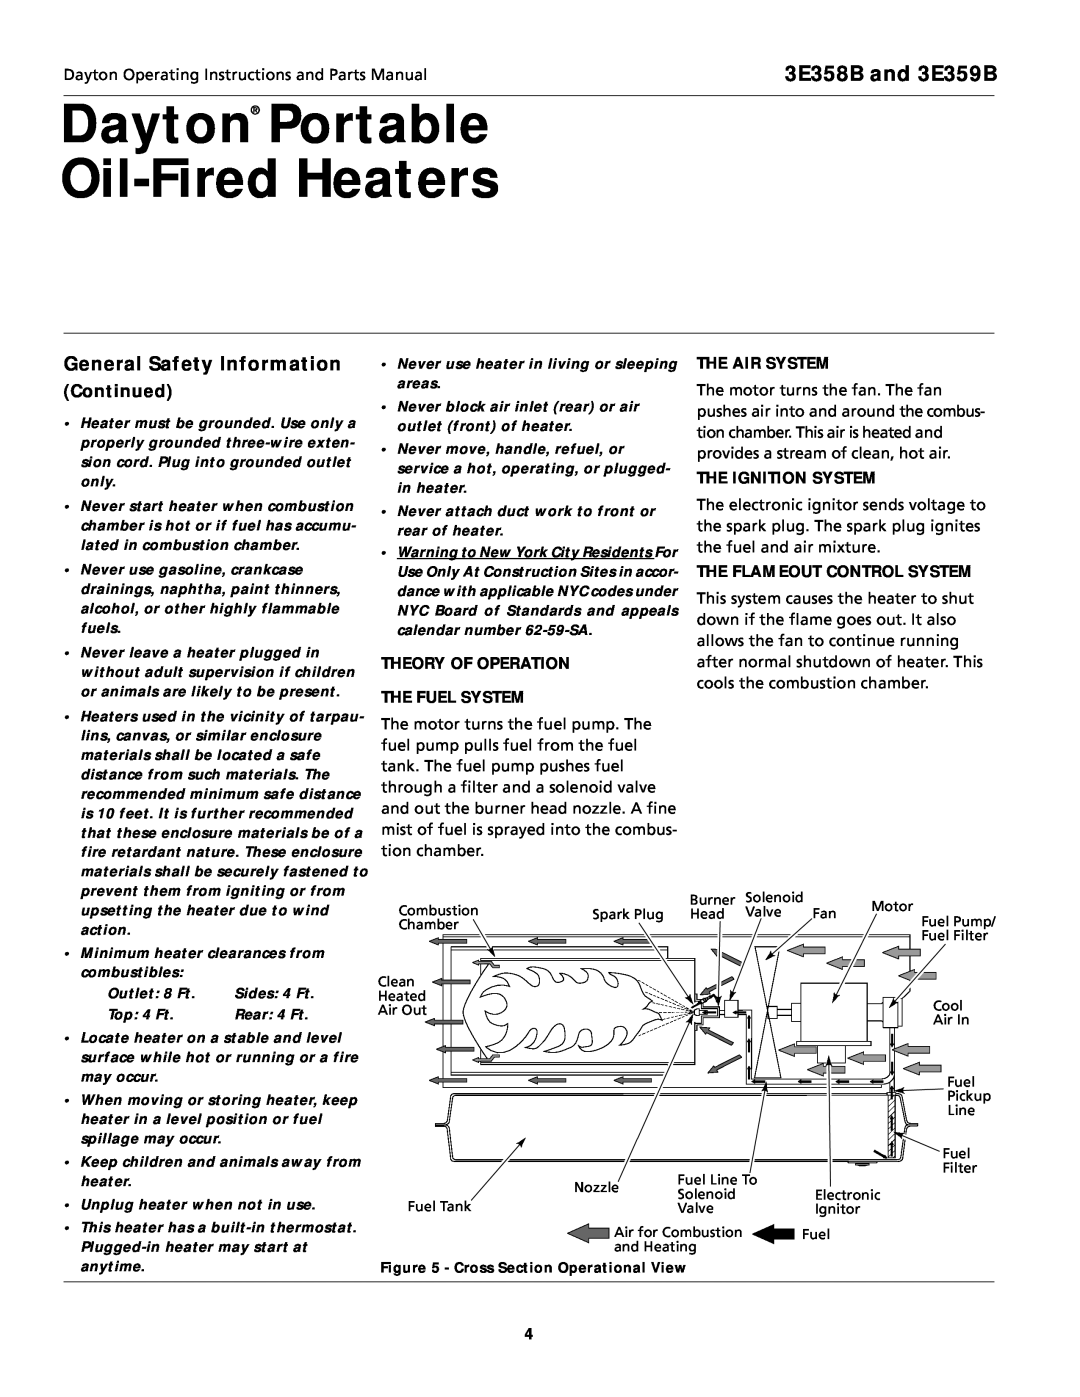 Dayton specifications General Safety Information, Dayton Portable Oil-FiredHeaters, 3E358B and 3E359B, Continued 